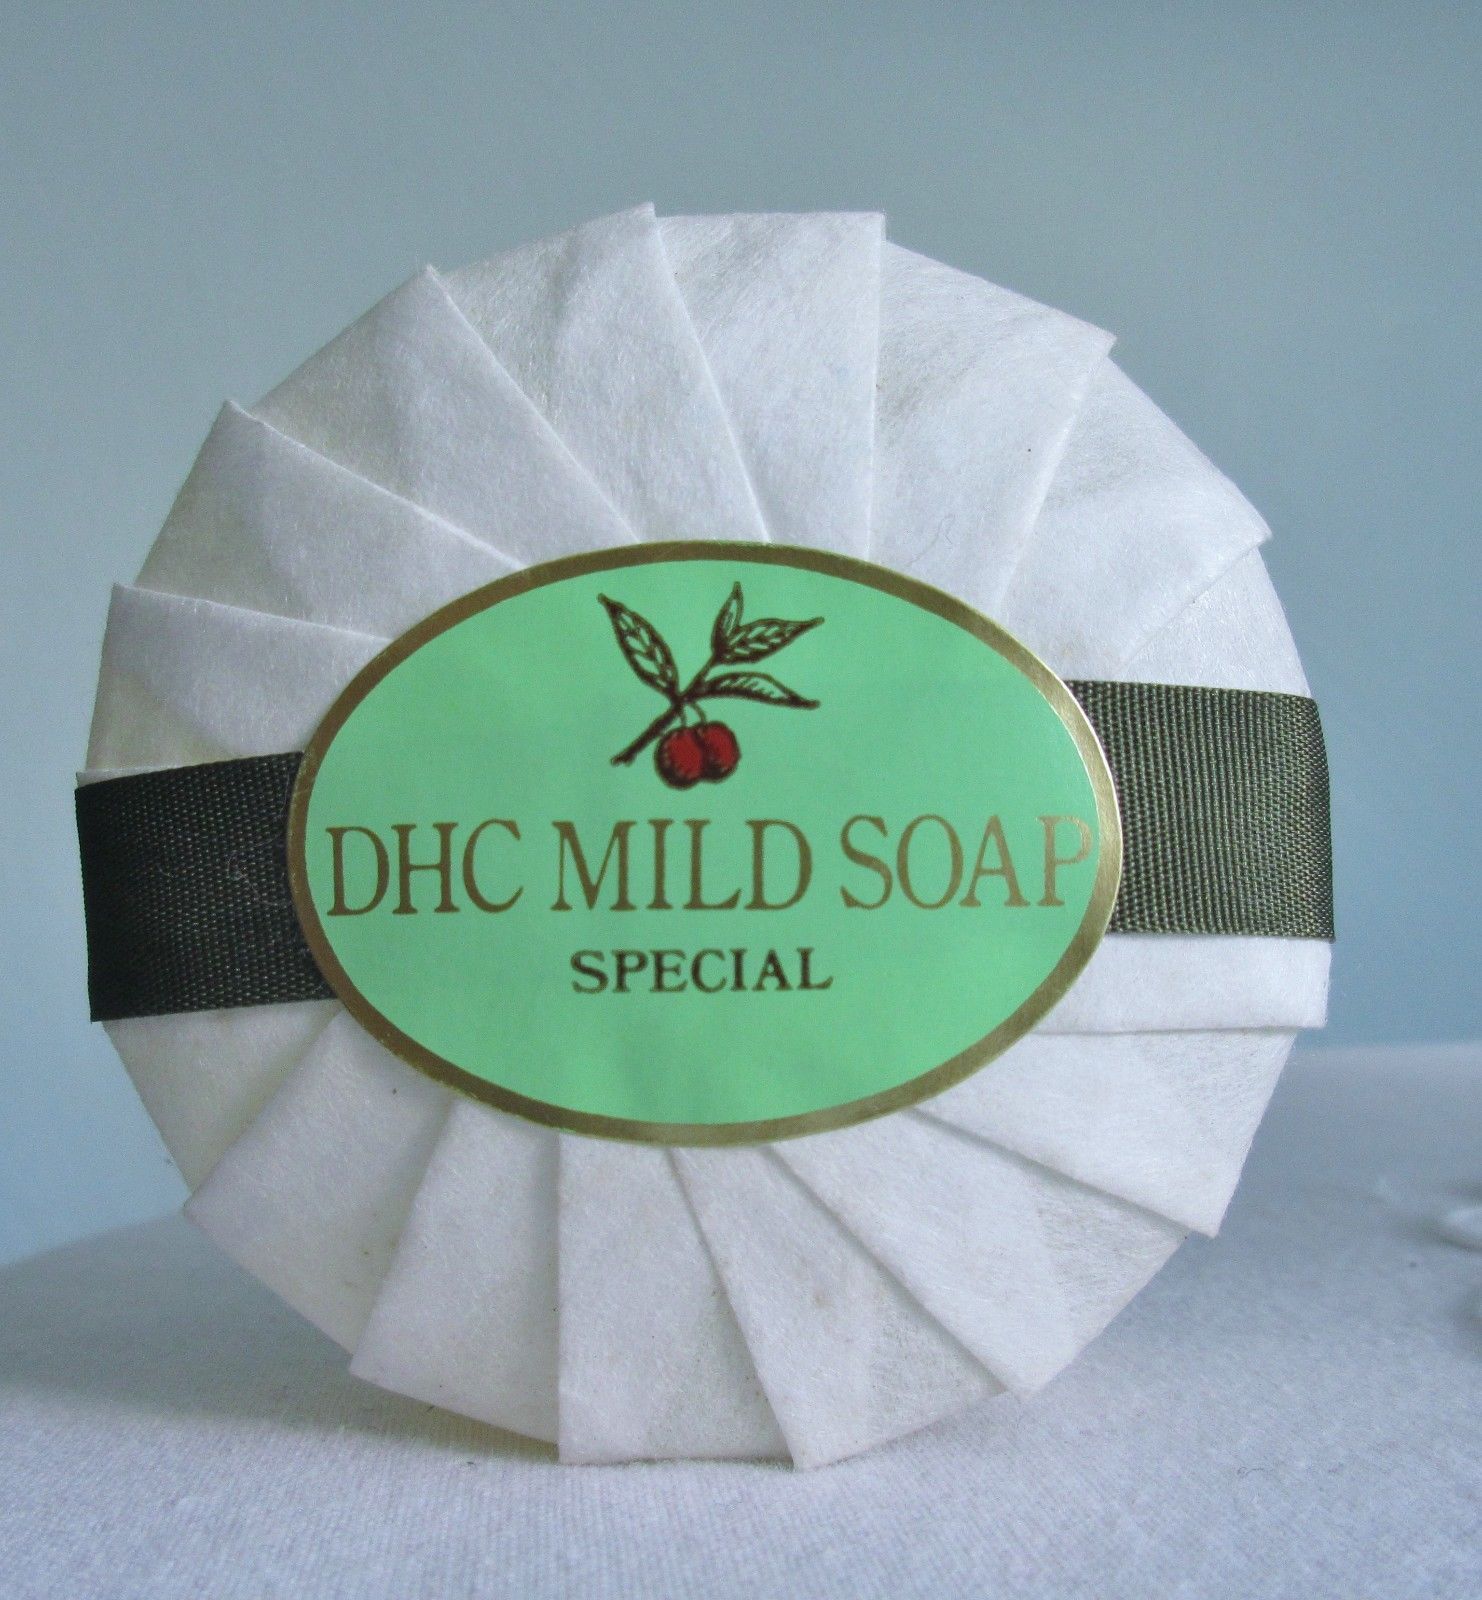 DHC Mild Soap Special 3.1 oz Full Size Gentle Hydrating Face Soap Made In Japan  - $17.00